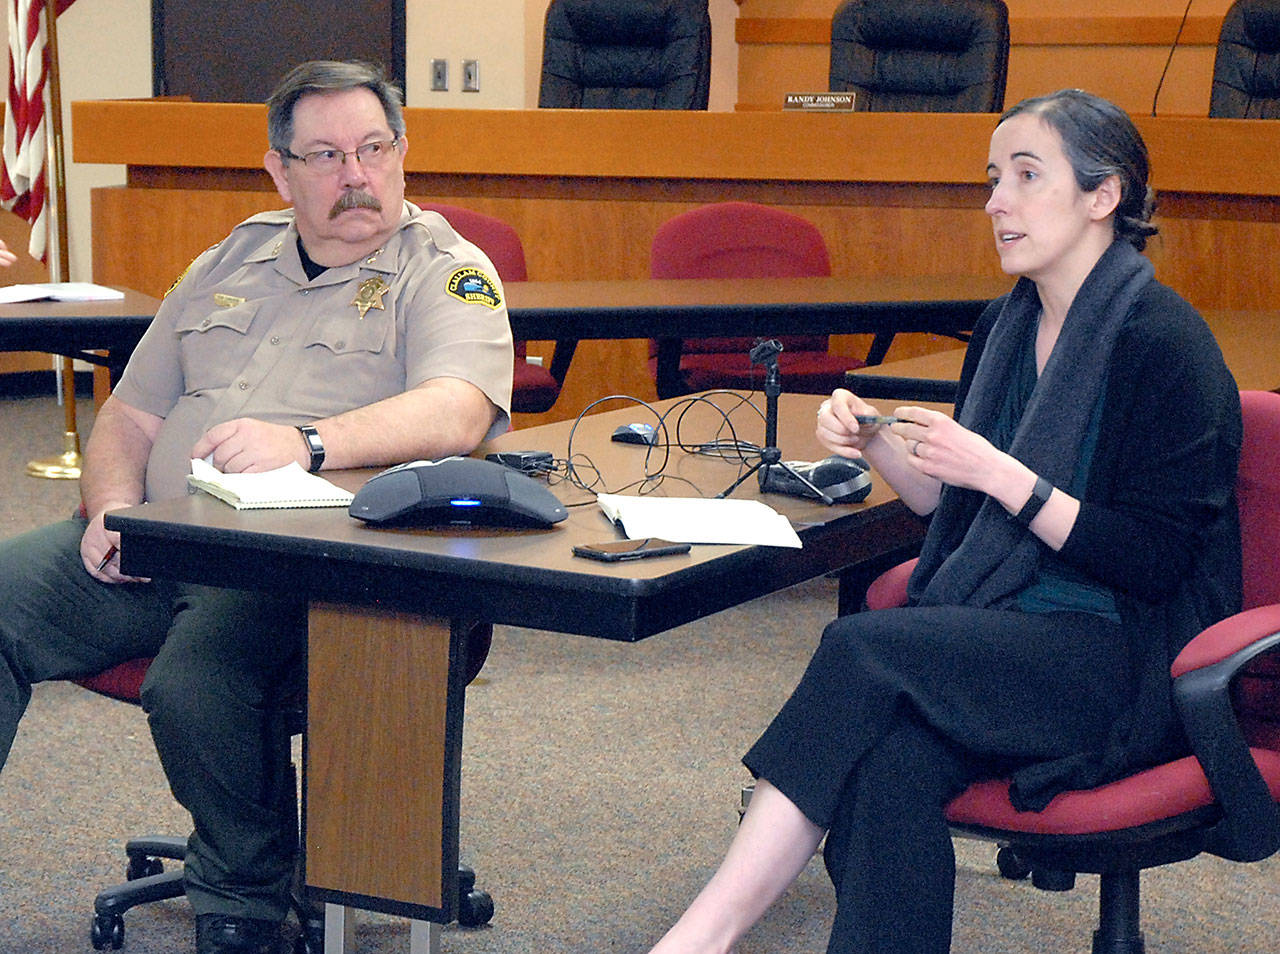 Dr. Allison Berry Unthank, Clallam County public health officer, right, provides an update on the novel coronavirus as Clallam County Undersheriff Ron Cameron listens in Tuesday, March 17, 2020, at the Clallam County Courthouse in Port Angeles. (Keith Thorpe/Peninsula Daily News)